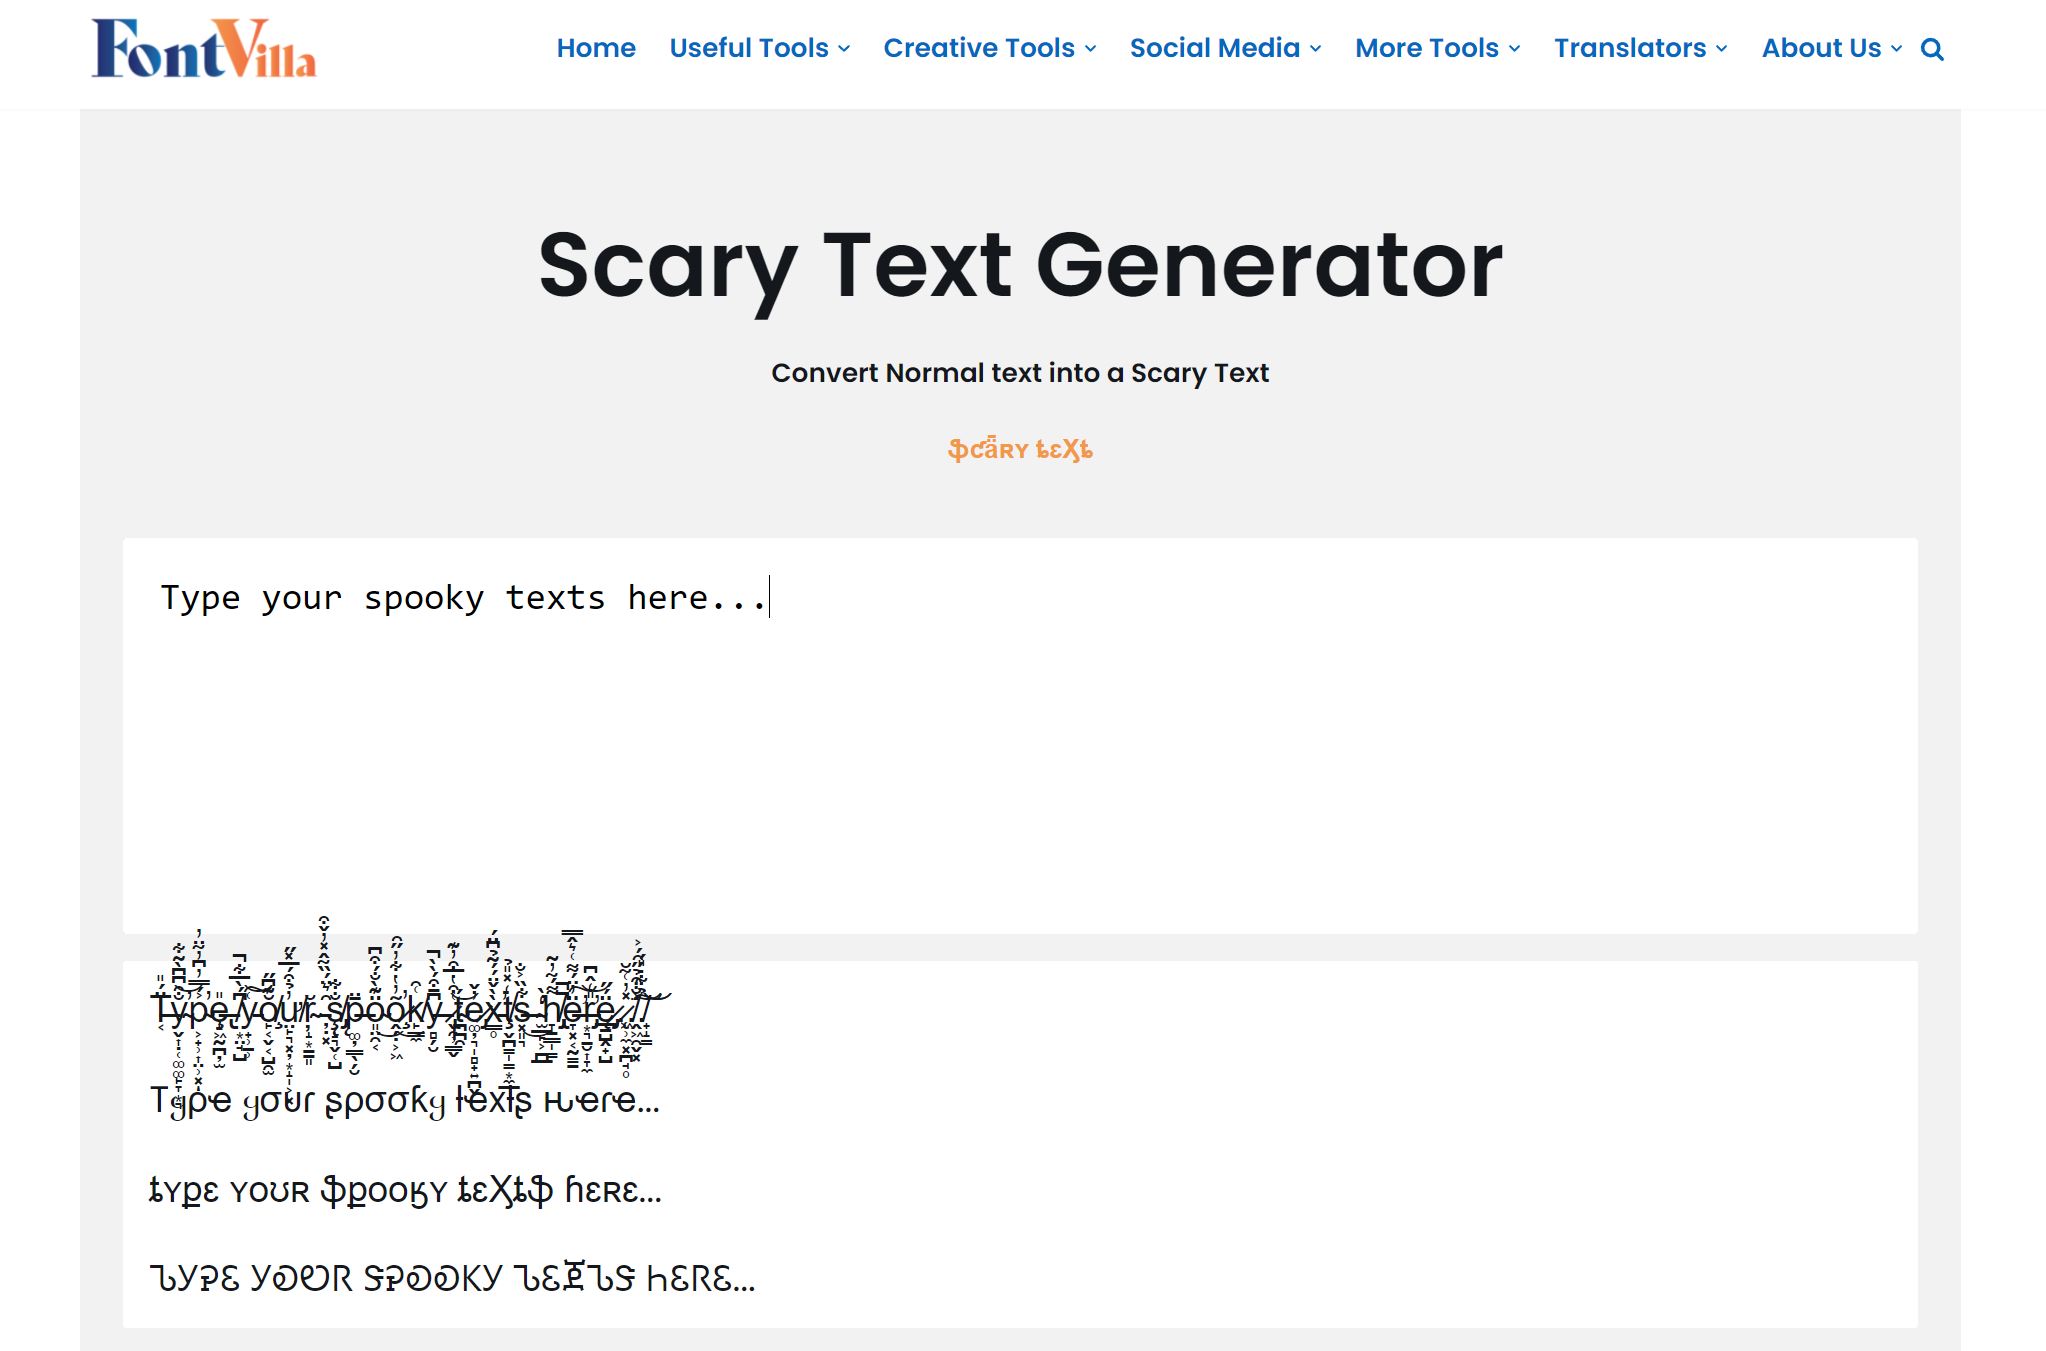 Scary Text Generator